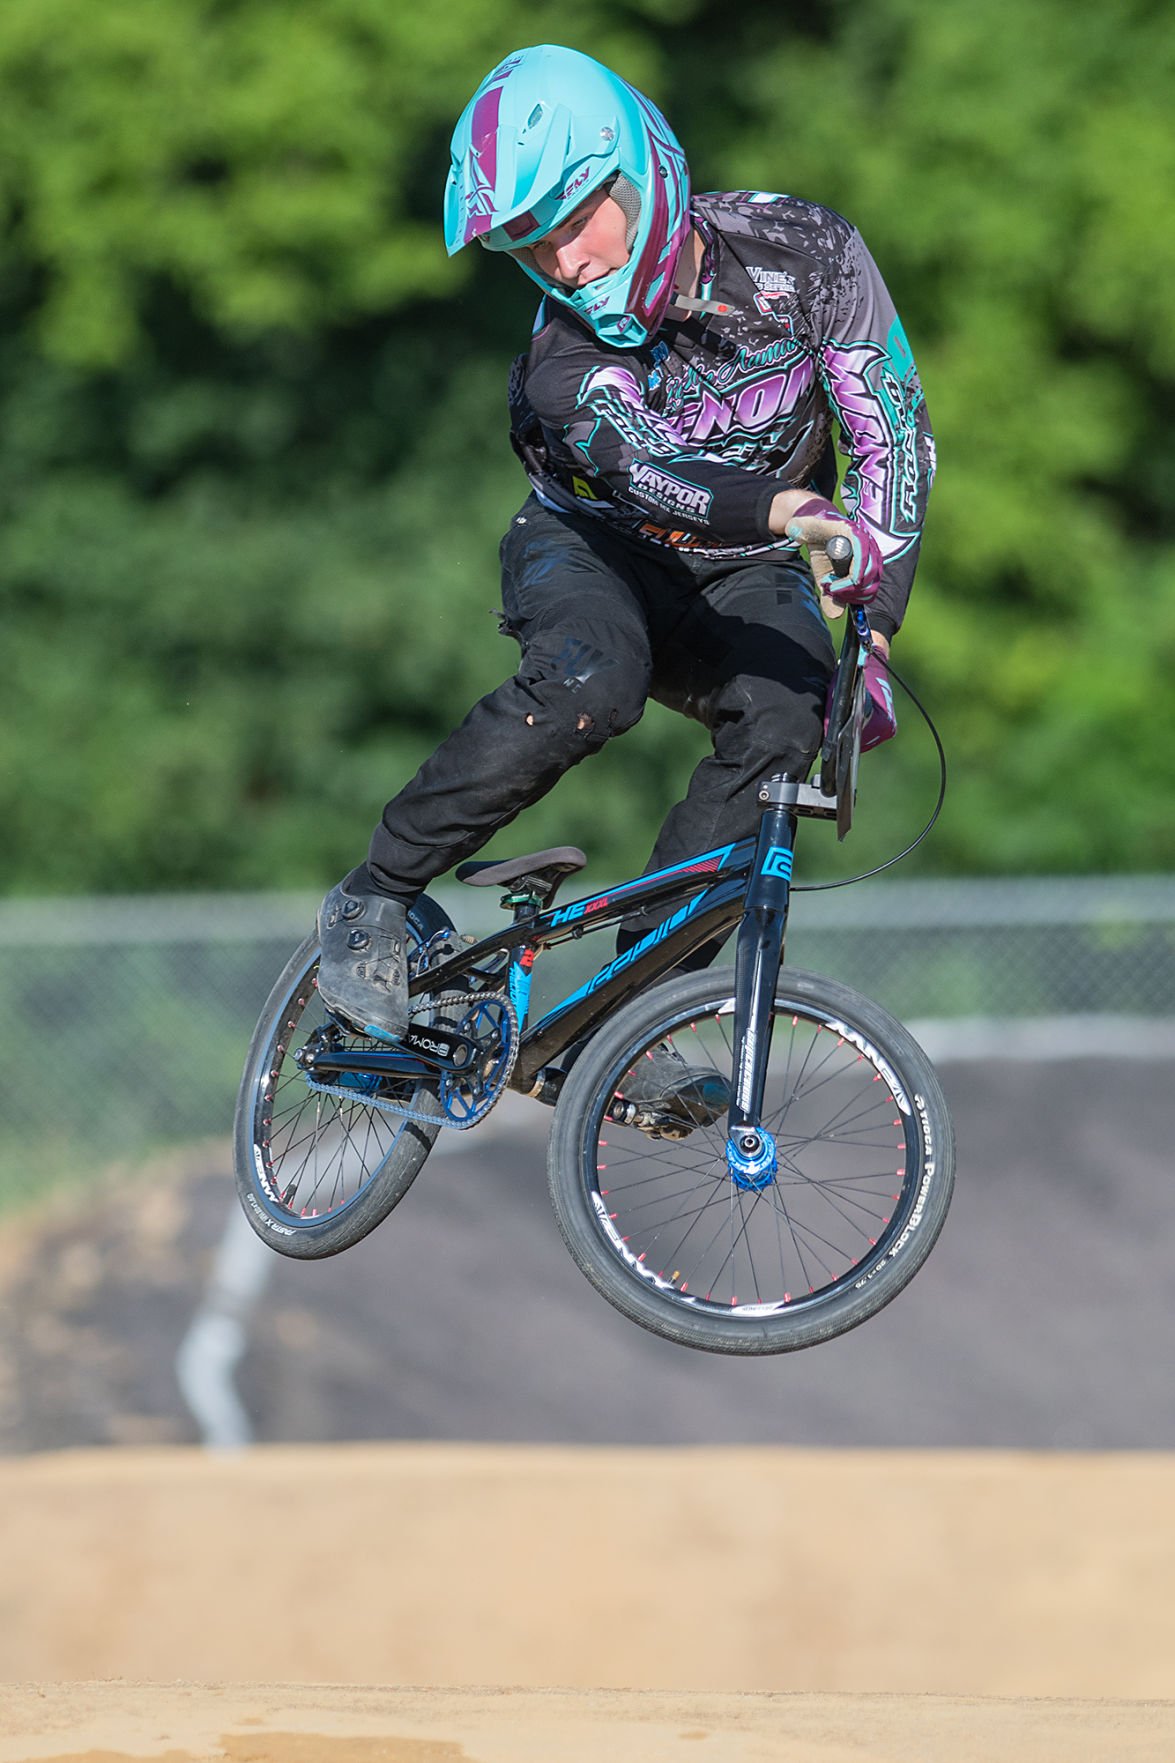 In Mankato, BMX racing is a family affair | Local Sports ...